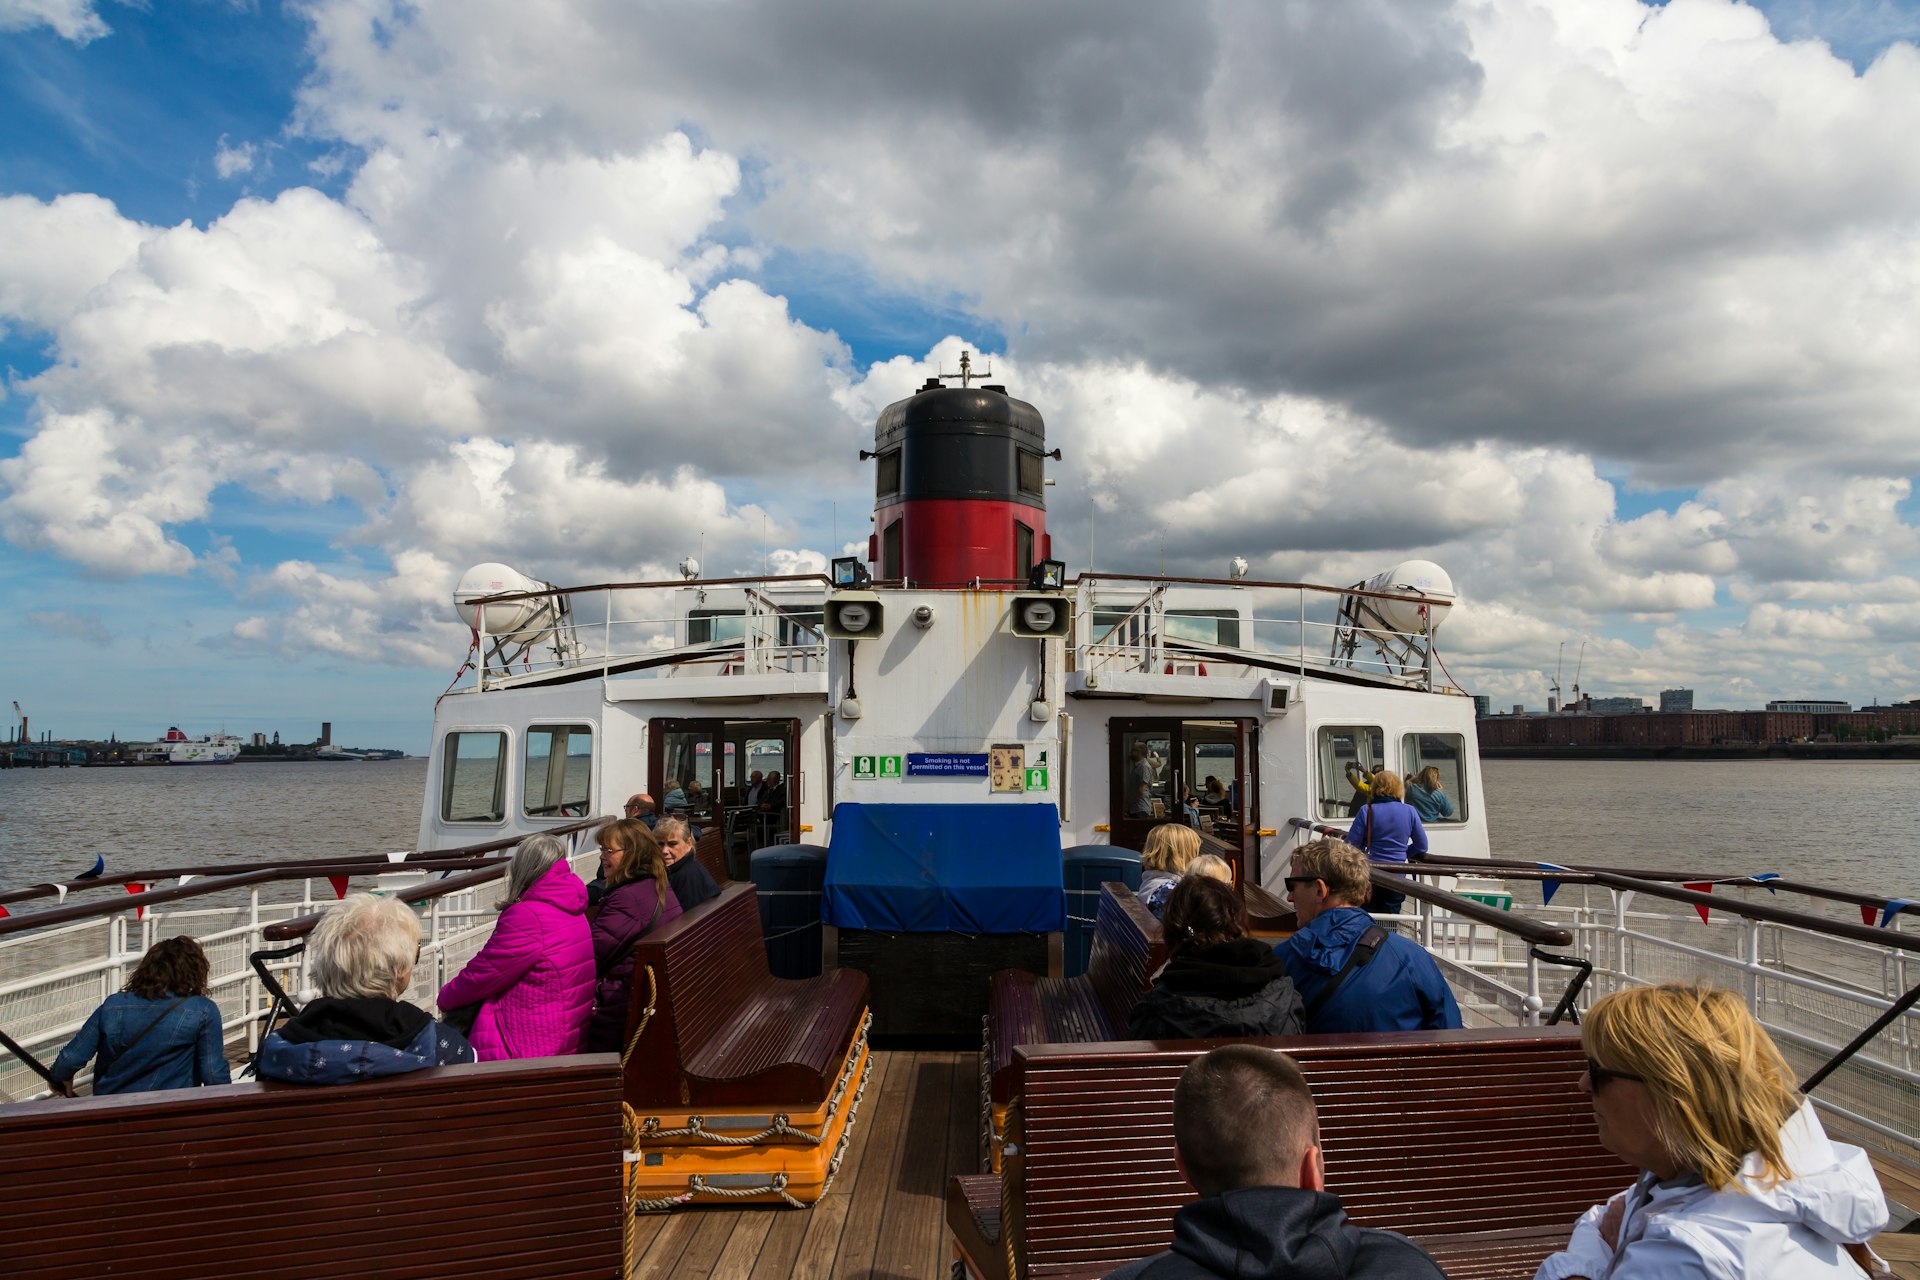 Passengers sit on the on the Mersey Ferry in Liverpool as it crosses the River Mersey